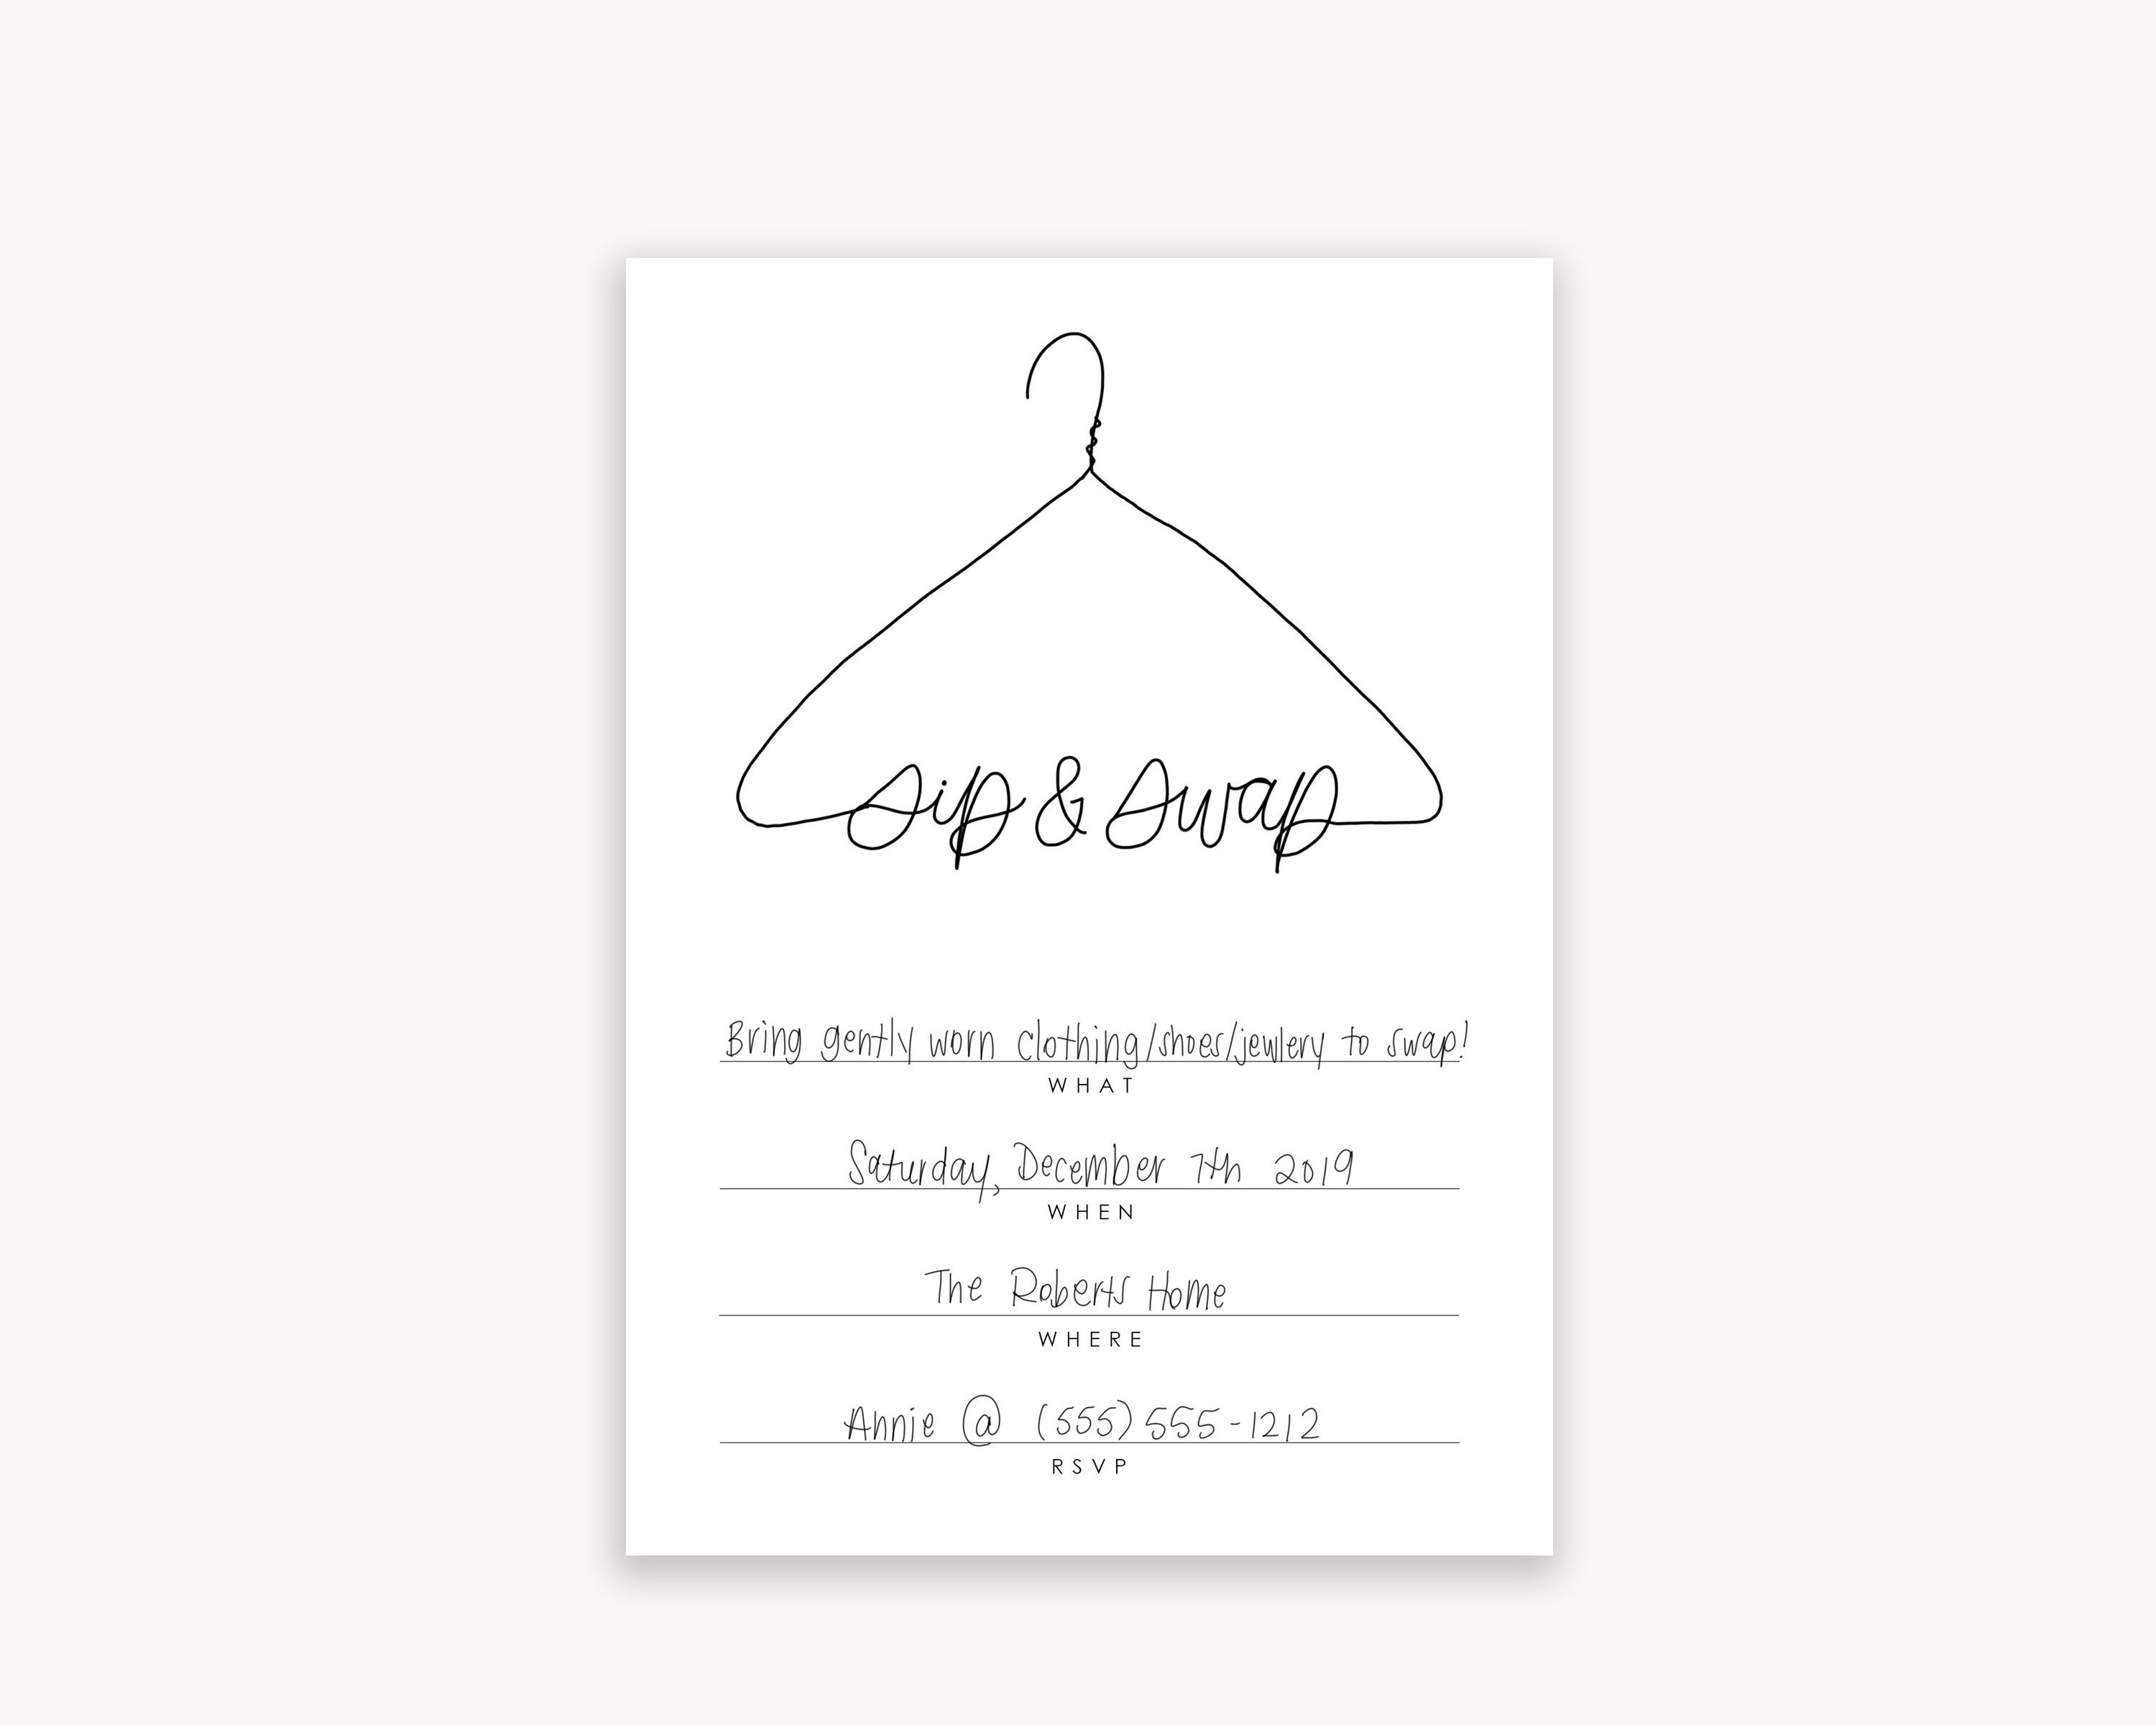 Sip and Swap Printable Invitations Clothing Swap Party picture